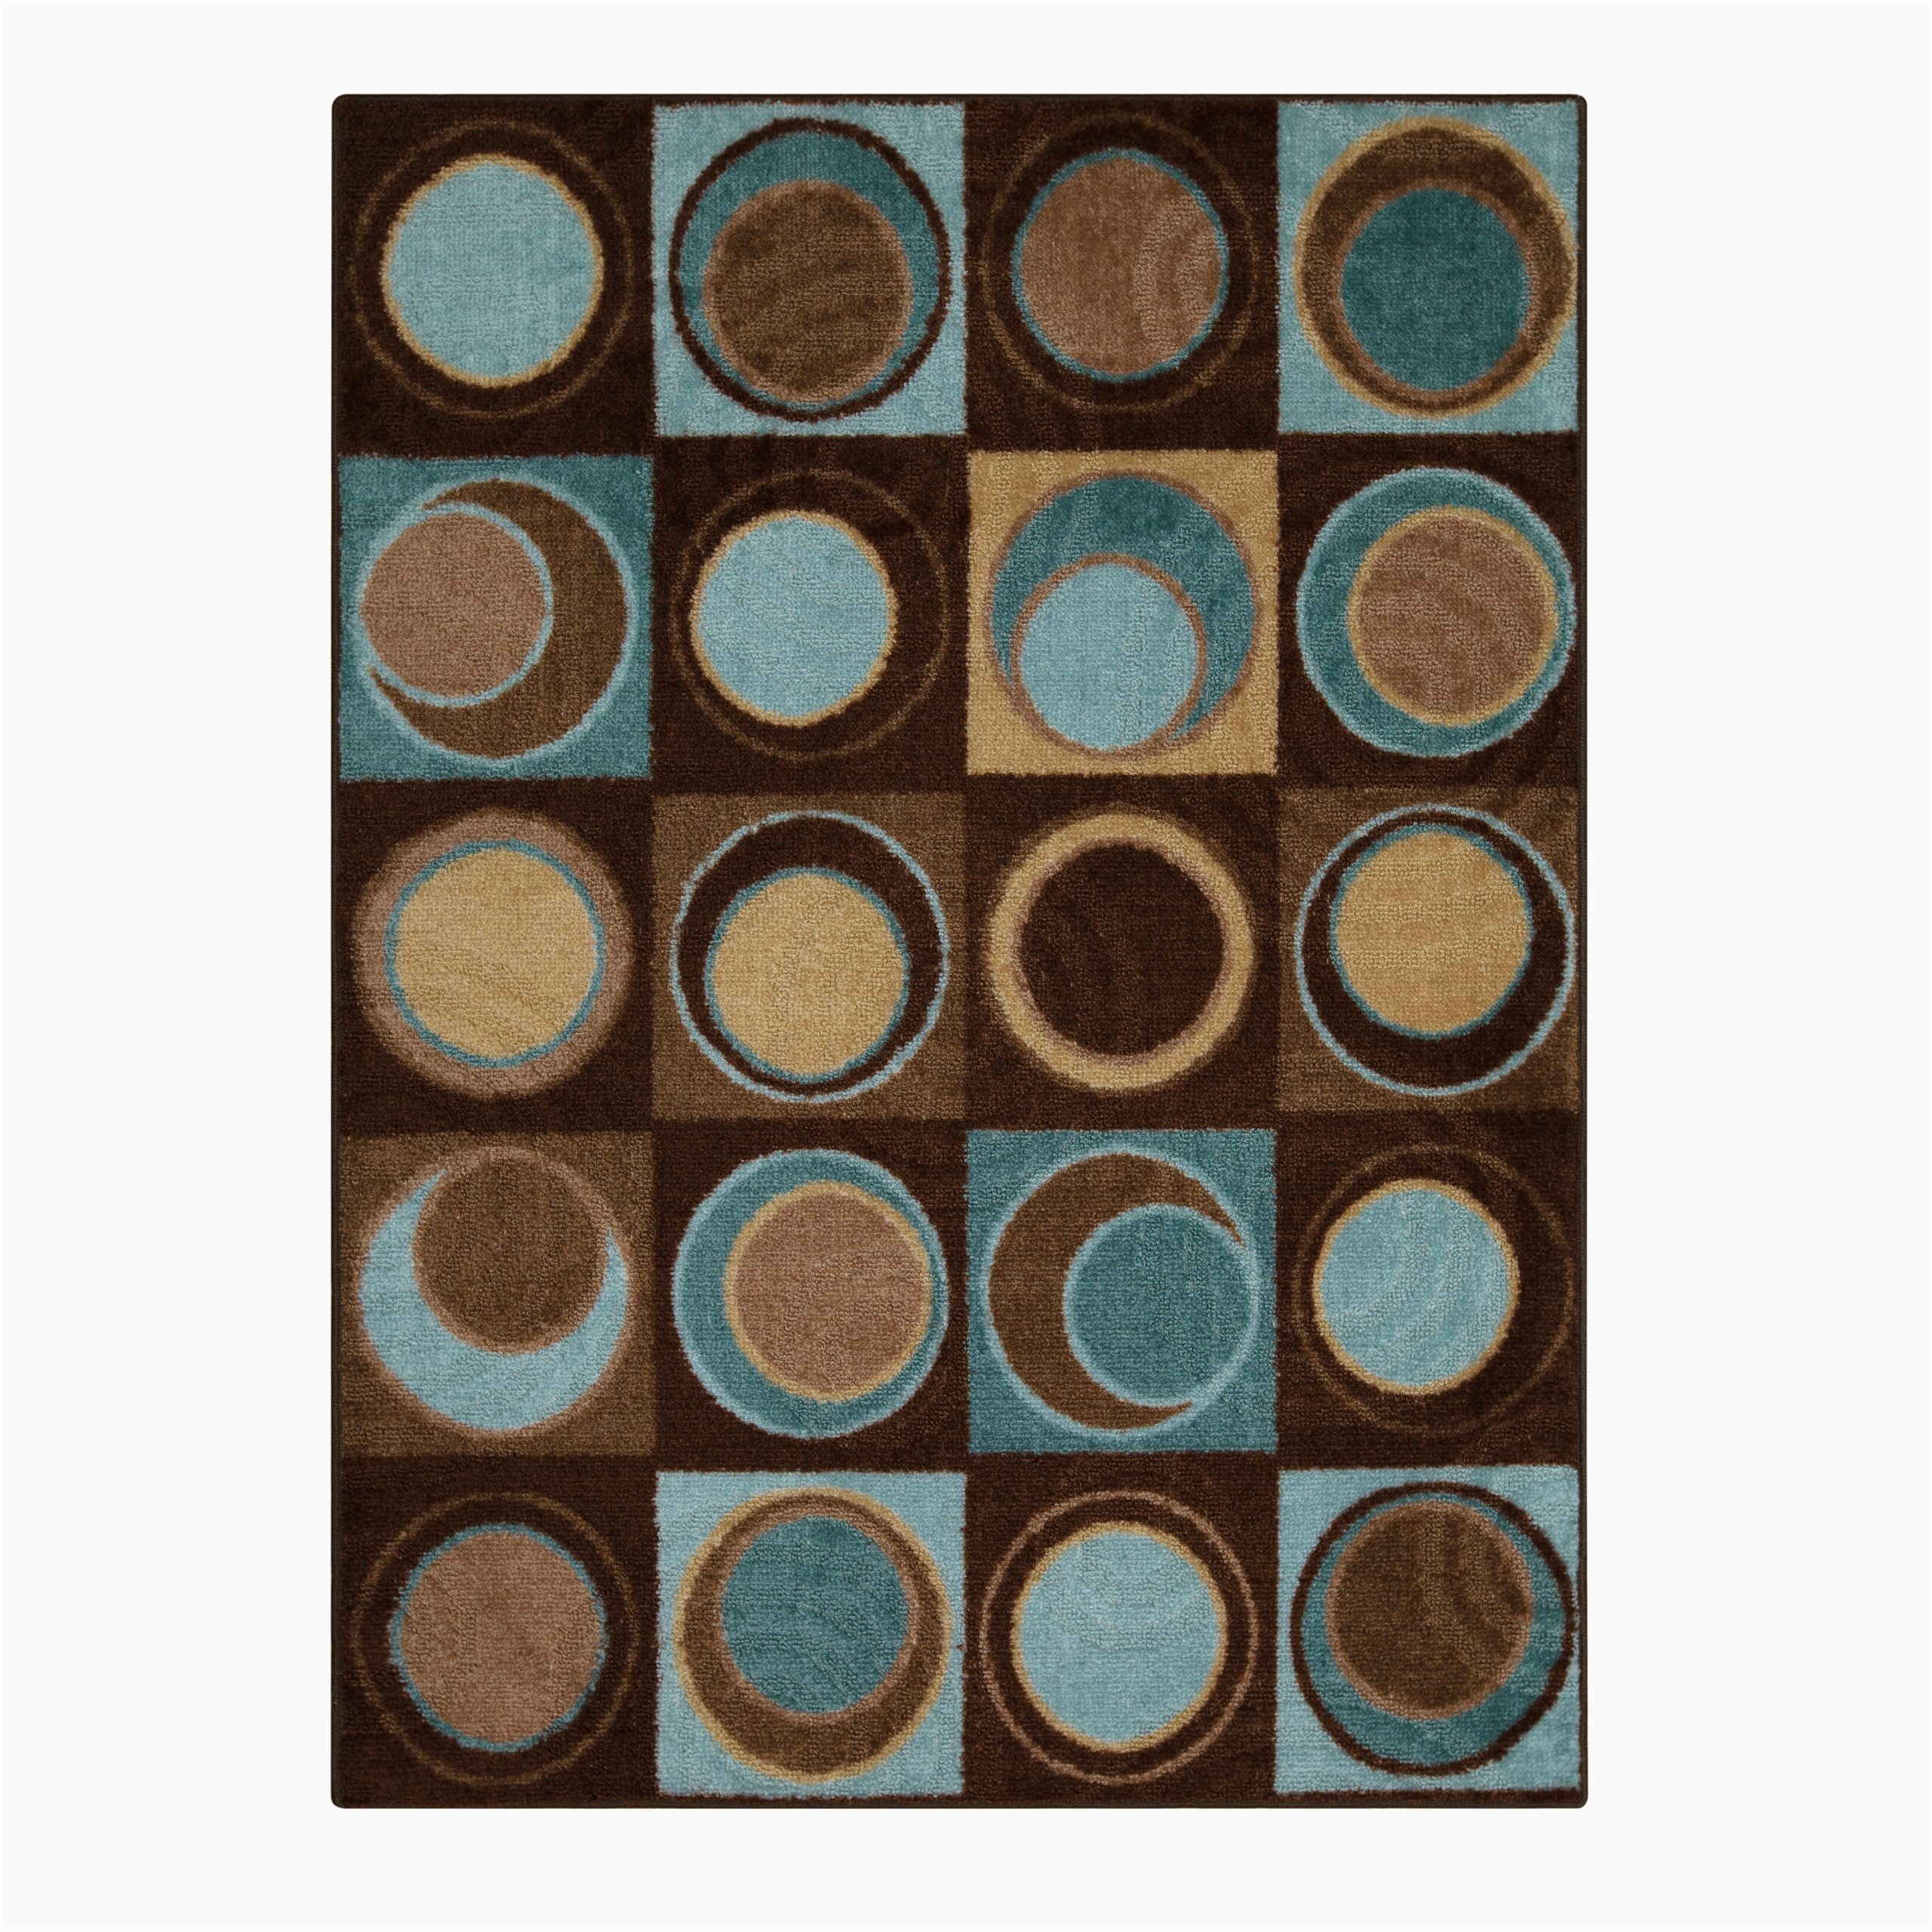 Better Homes and Gardens Circle Block area Rugs Better Homes & Gardens Circle Block Textured Print area Rug or Runner, Blue/brown, 1’8″x2’10”